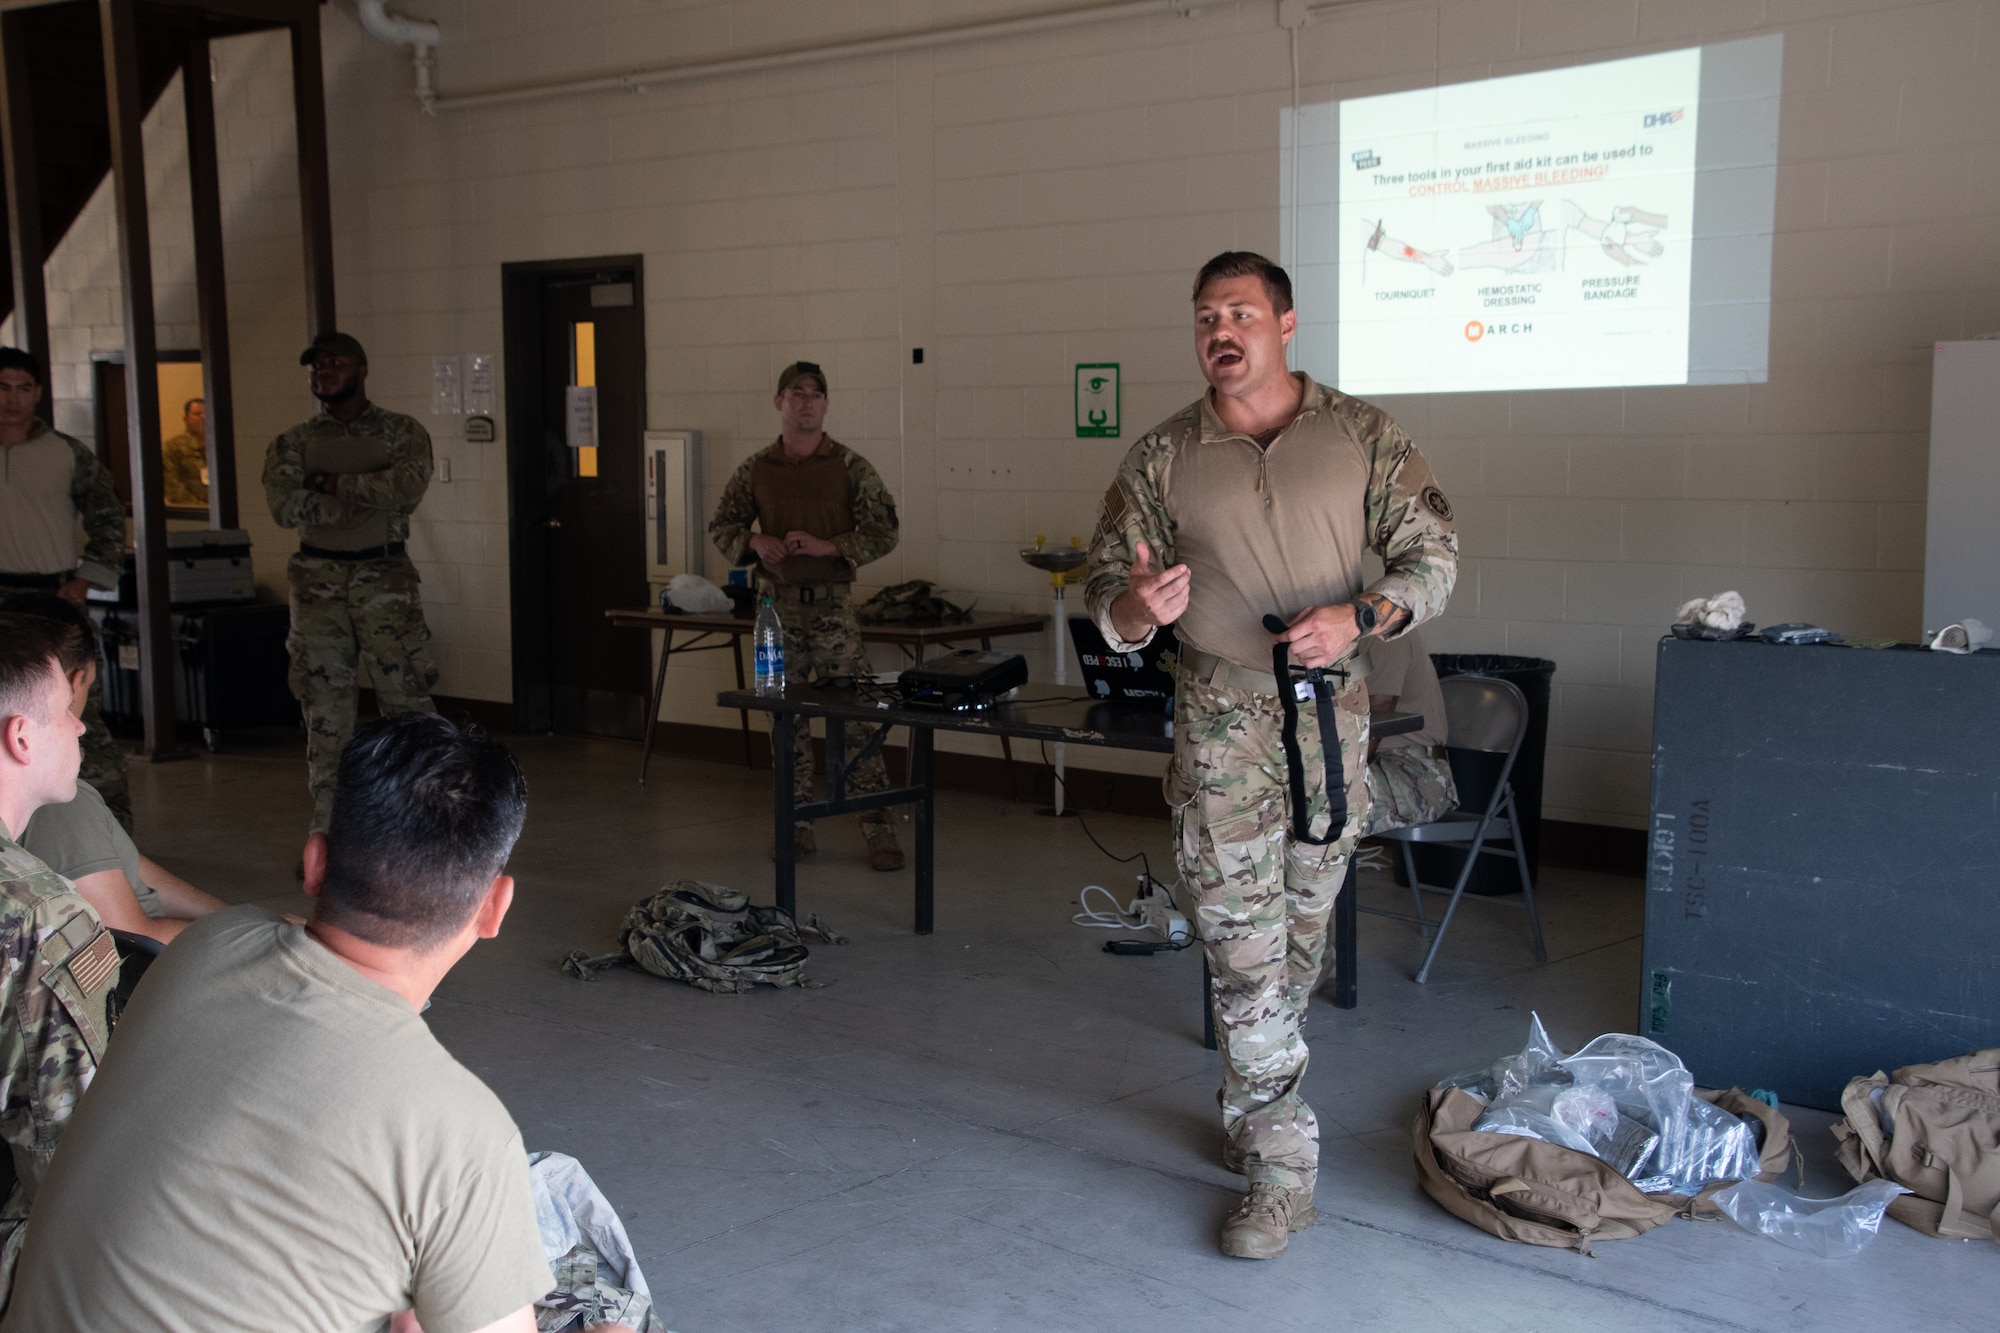 Members with the 221st and 239th Combat Communications Squadrons receive instruction on Tactical Combat Casualty Care from Staff Sgt. Travis Wilson, 159th Fighter Wing, during Exercise BUMBU 22 at Camp Shelby, Mississippi, June 9, 2022. BUMBU 22 is a training exercise involving five geographically-separated combat communications squadrons from across the 254th Combat Communications Group. (U.S. Air National Guard photo by Airman 1st Class Kelly Ferguson)